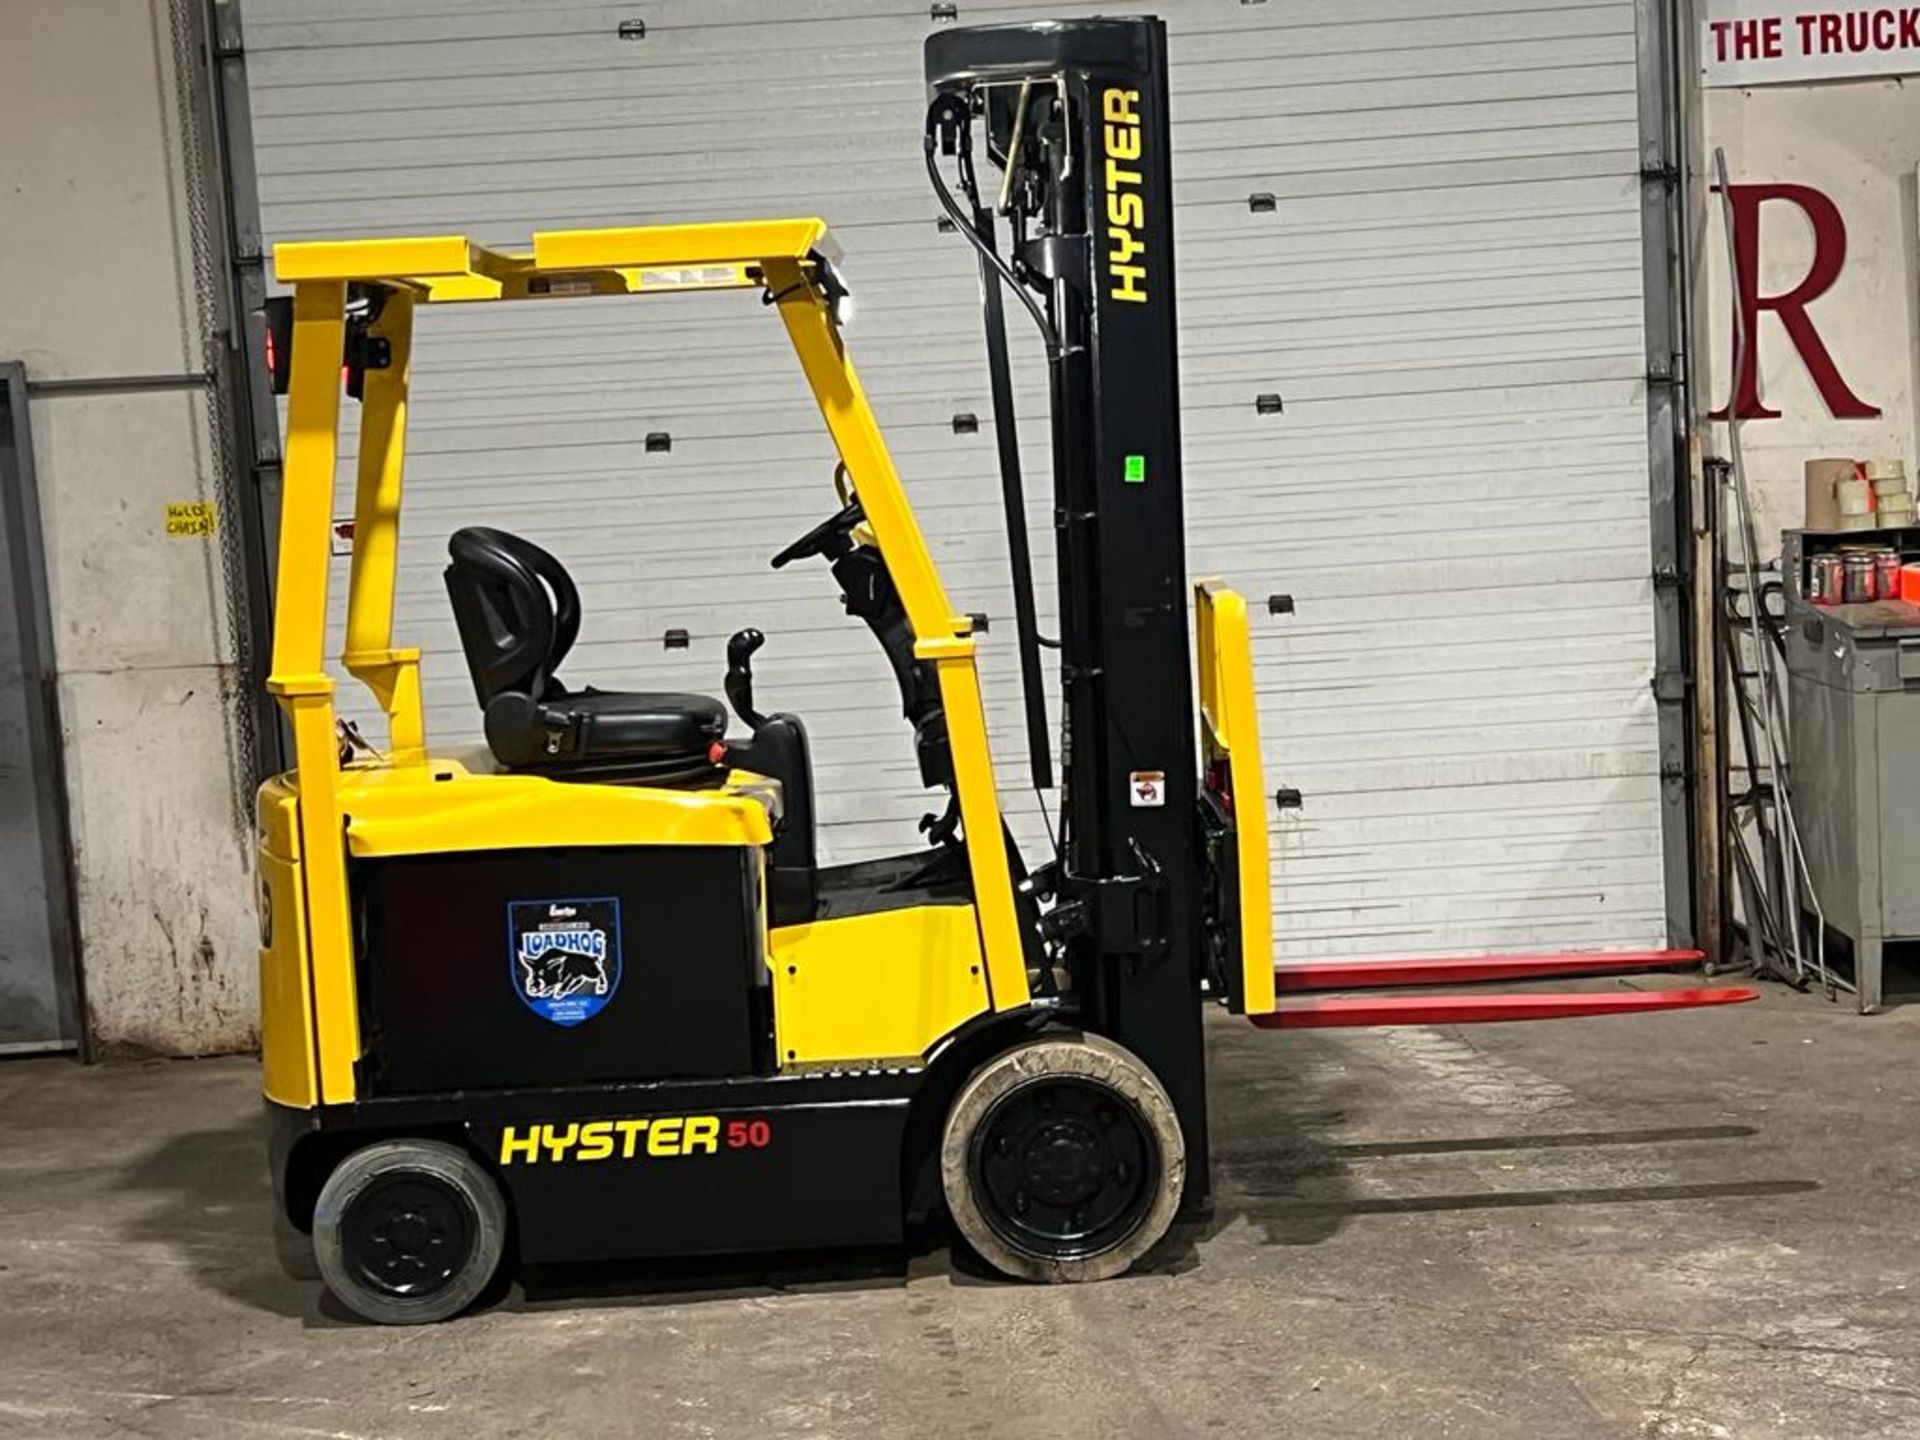 2017 Hyster 5,000lbs Capacity Forklift Electric with 48V Battery & 4-STAGE MAST with Sideshift